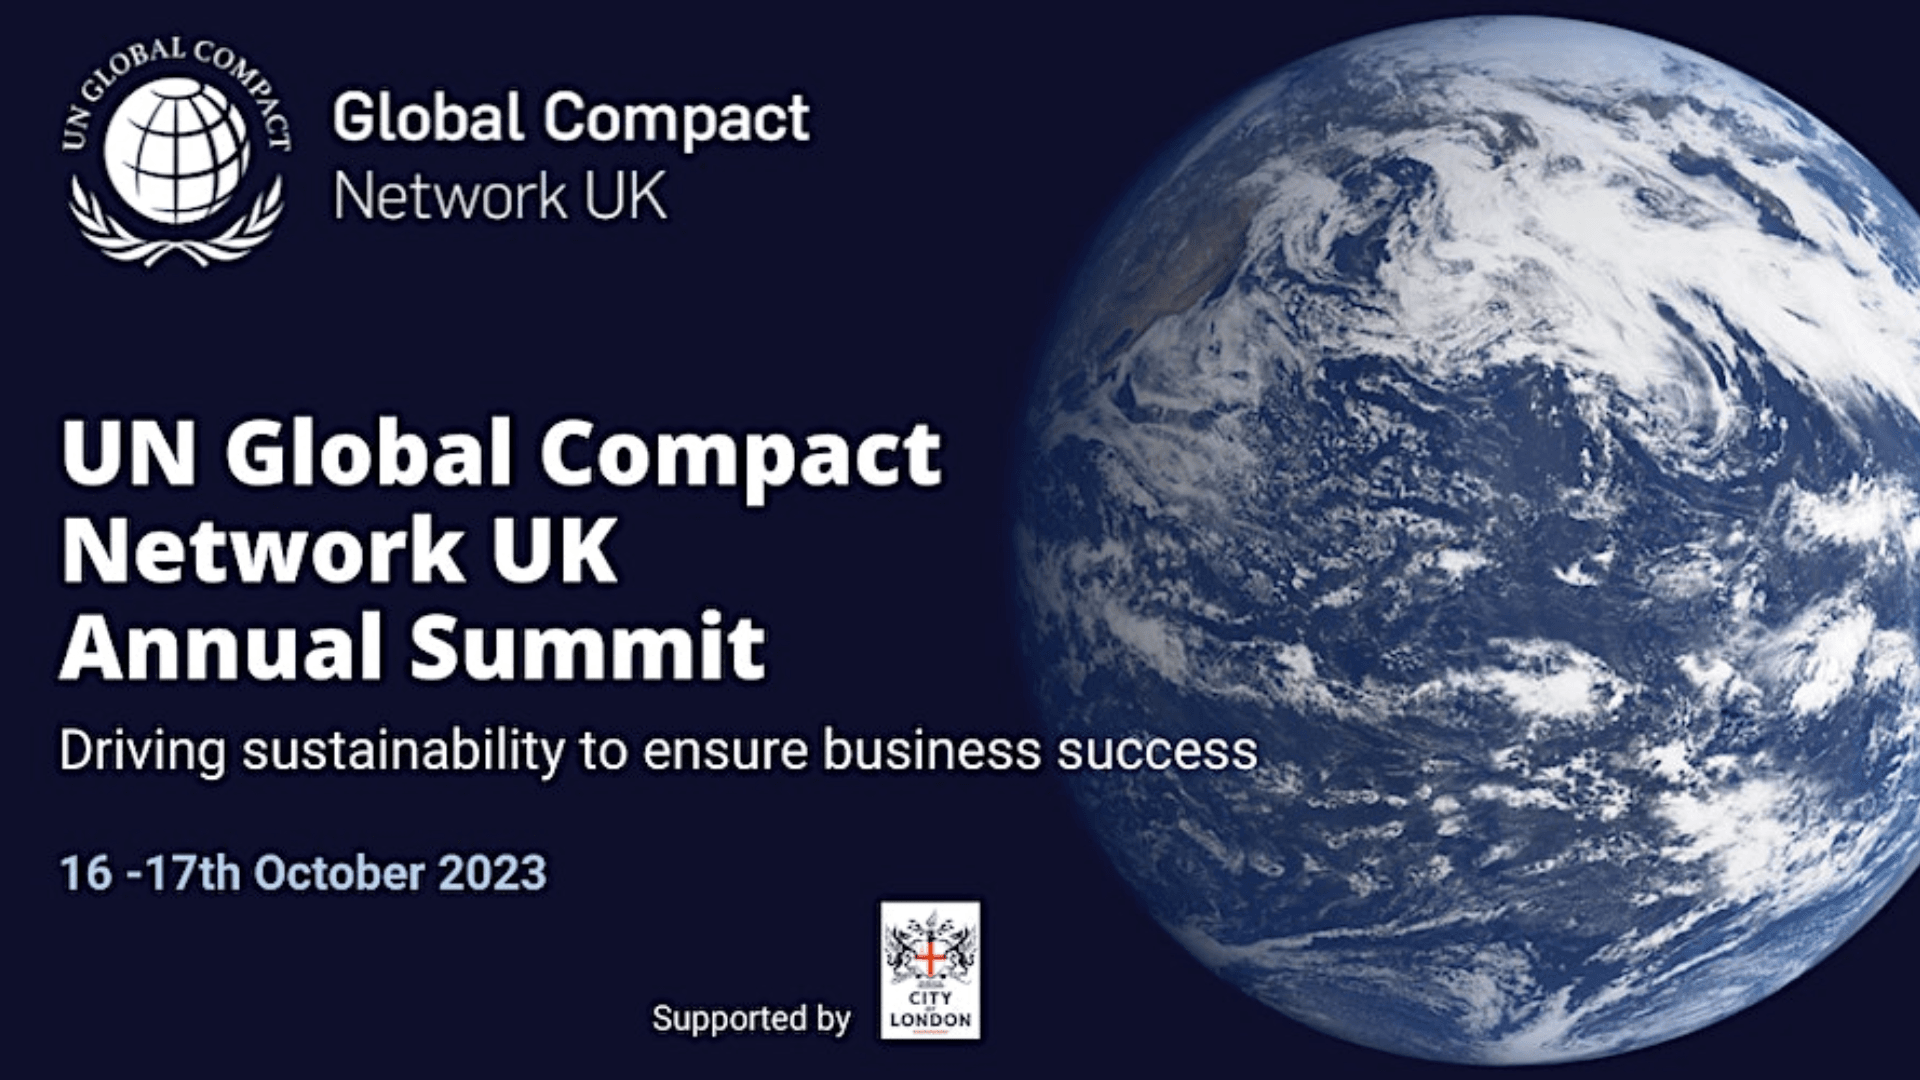 Annual Summit of UN Global Compact Network UK Aims to Address ESG Challenges Faced by Companies 1.png